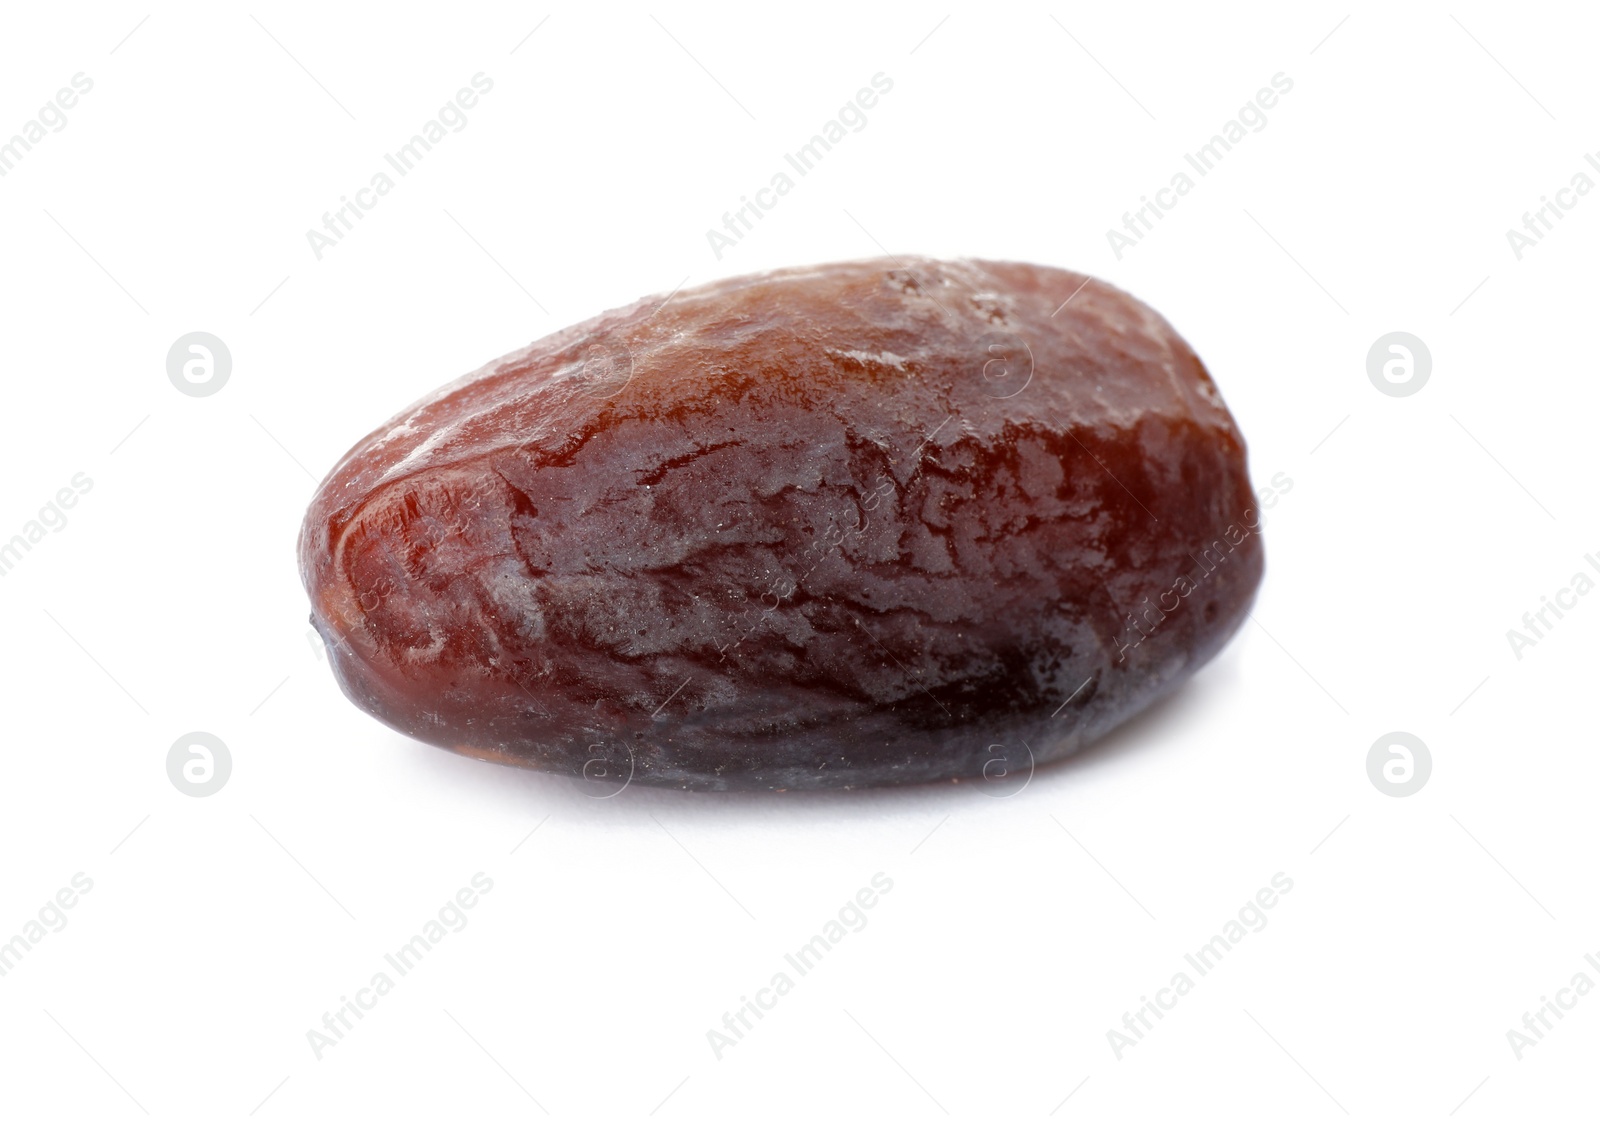 Photo of Sweet date on white background. Dried fruit as healthy snack